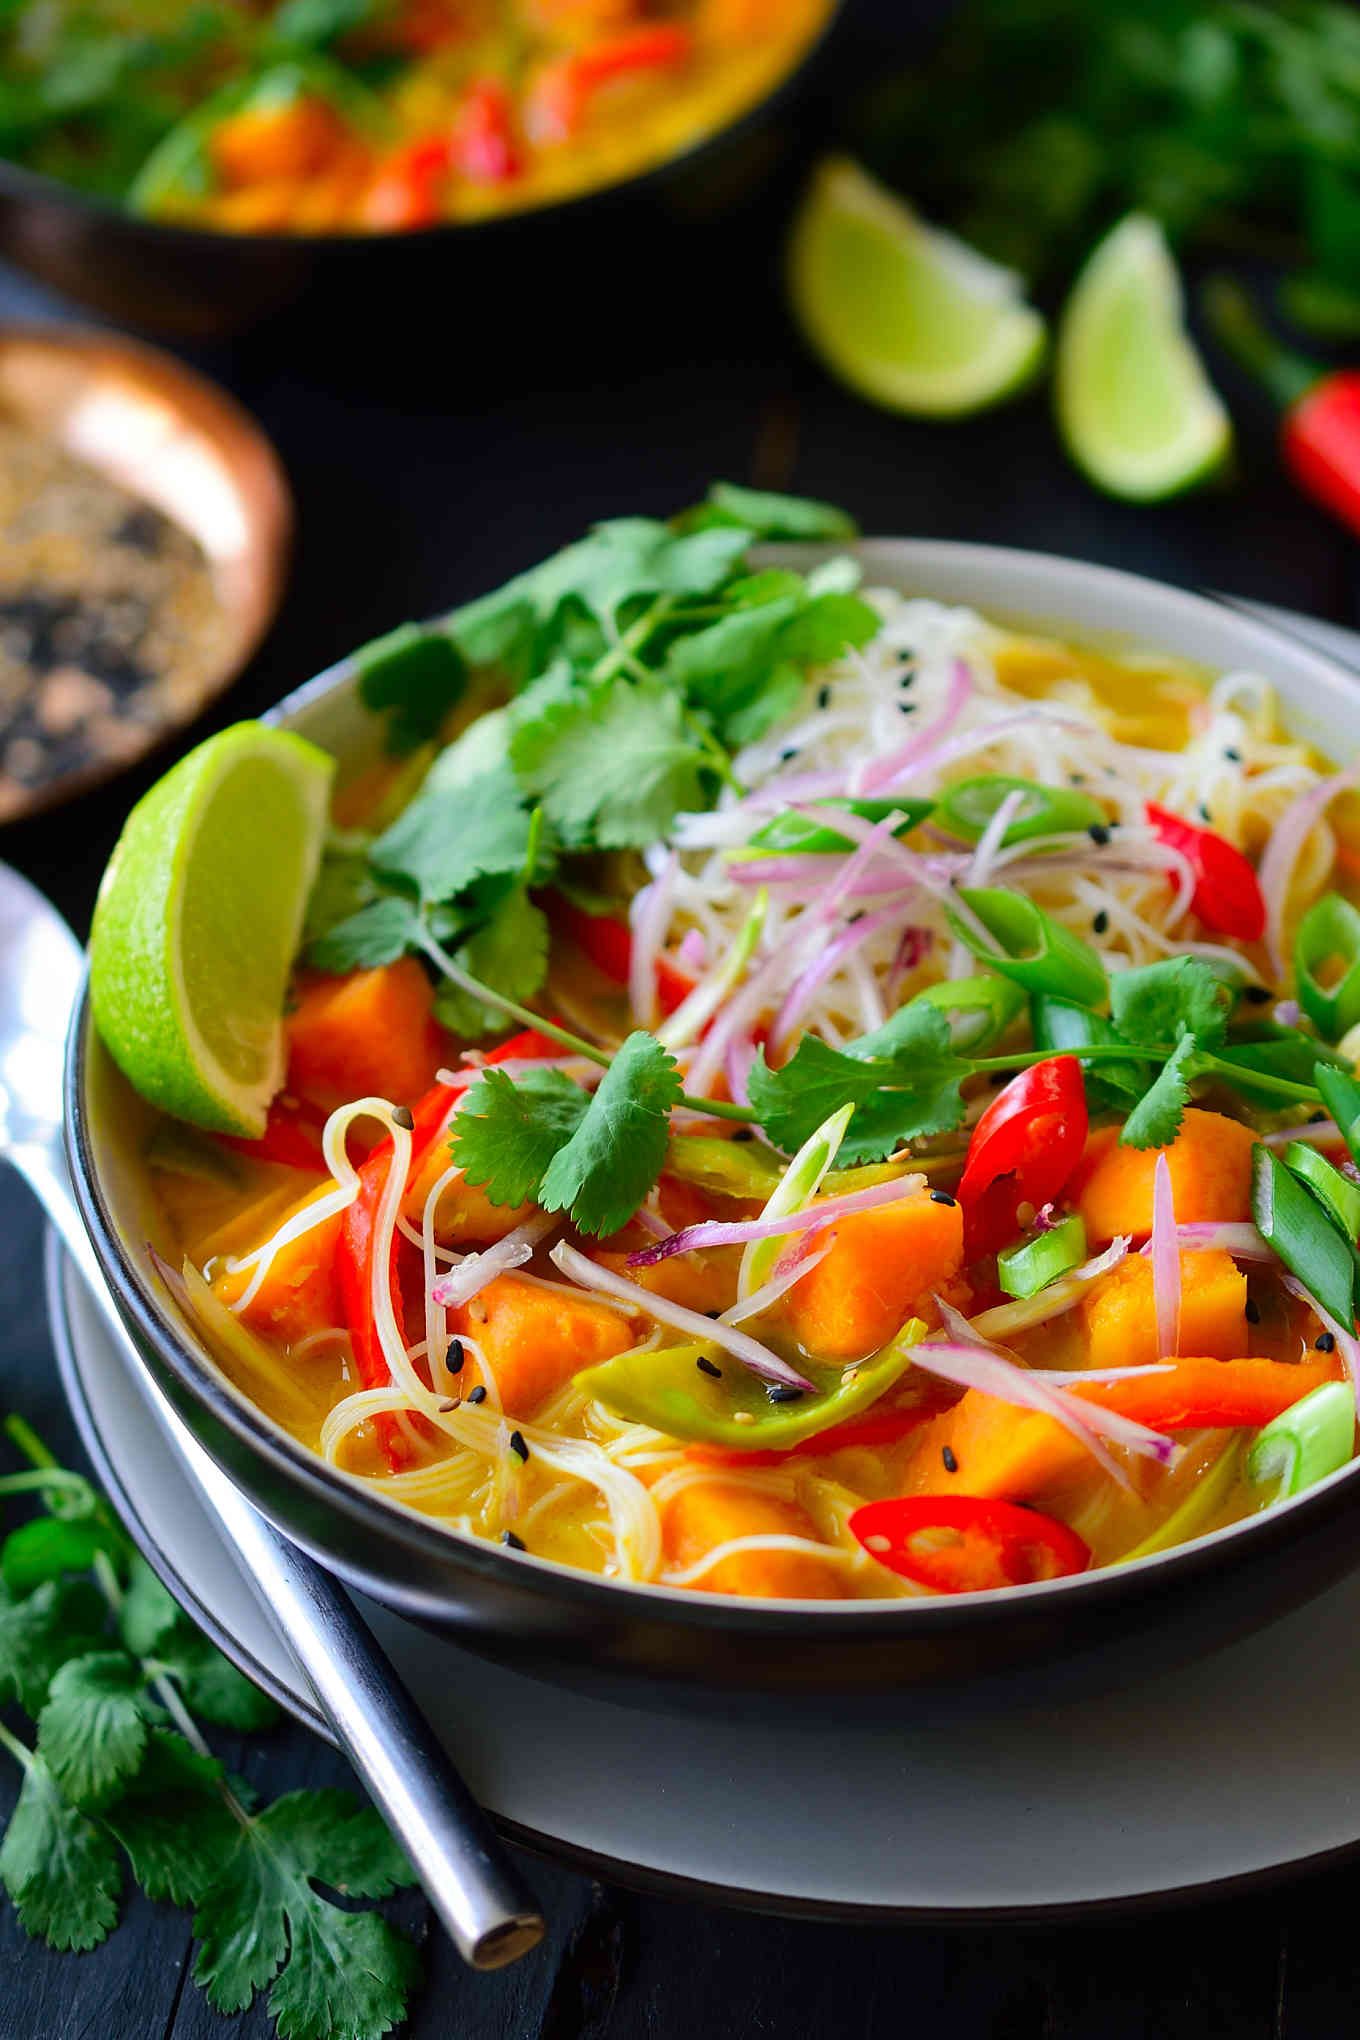 This vegetarian Thai soup is a hearty dish brimming with vegetables, rice noodles and herbs in a sweet, savoury and spicy coconut broth. It’s easy to make with a vegan store-bought curry paste and you won’t need any exotic ingredients to get this delicious soup on the table in just 20 minutes!